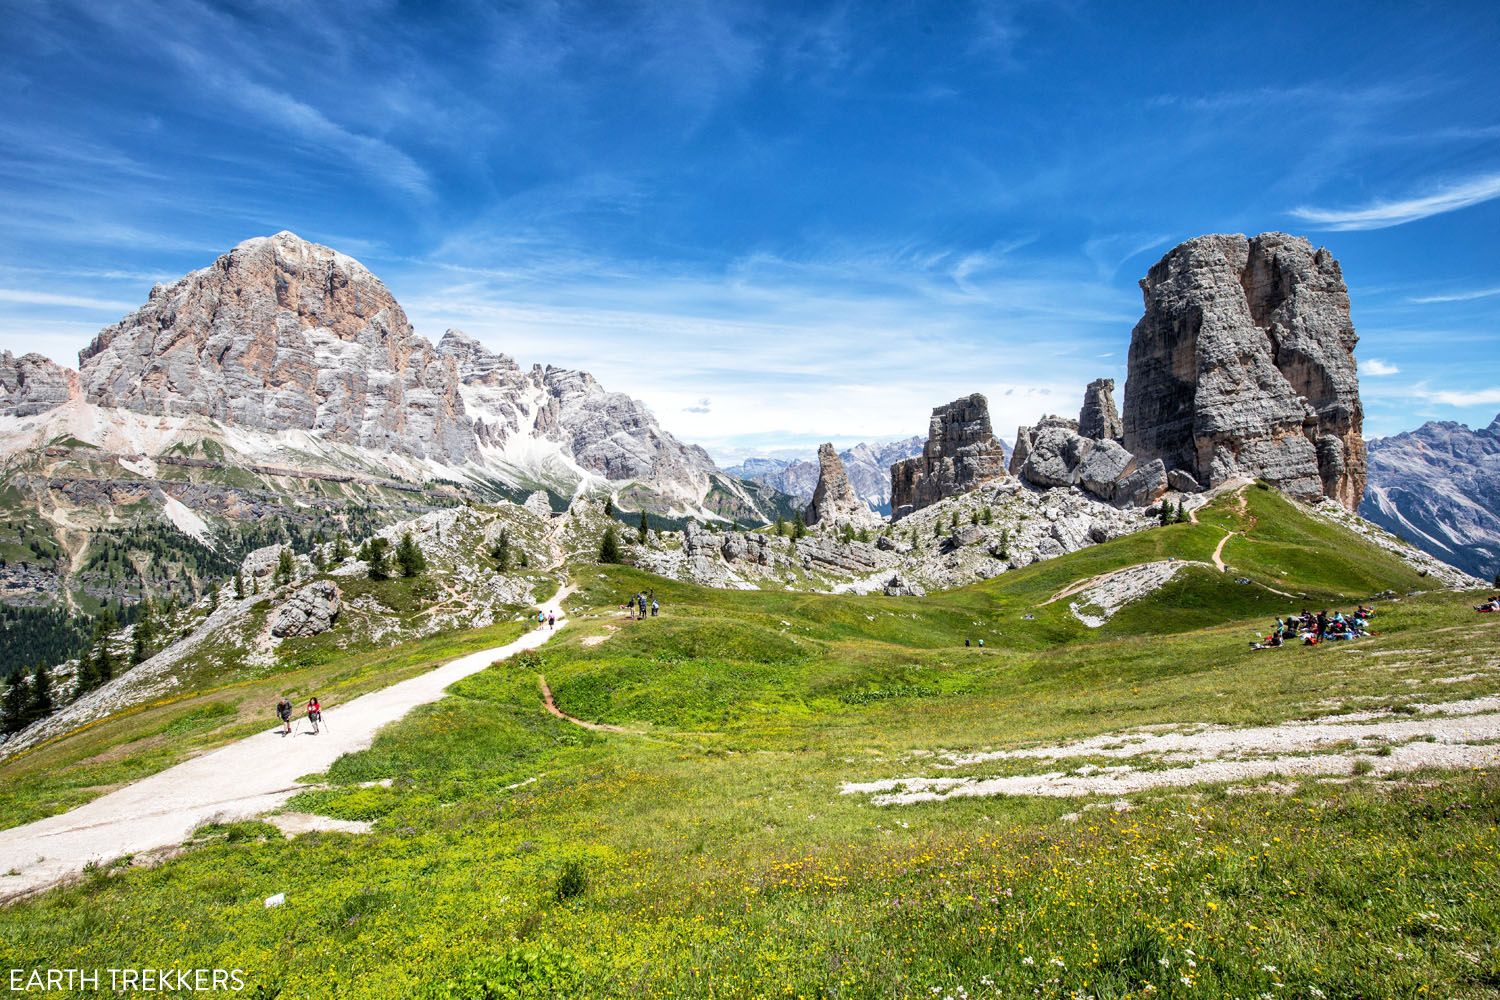 Dolomites Hikes | Best Things to Do in the Dolomites